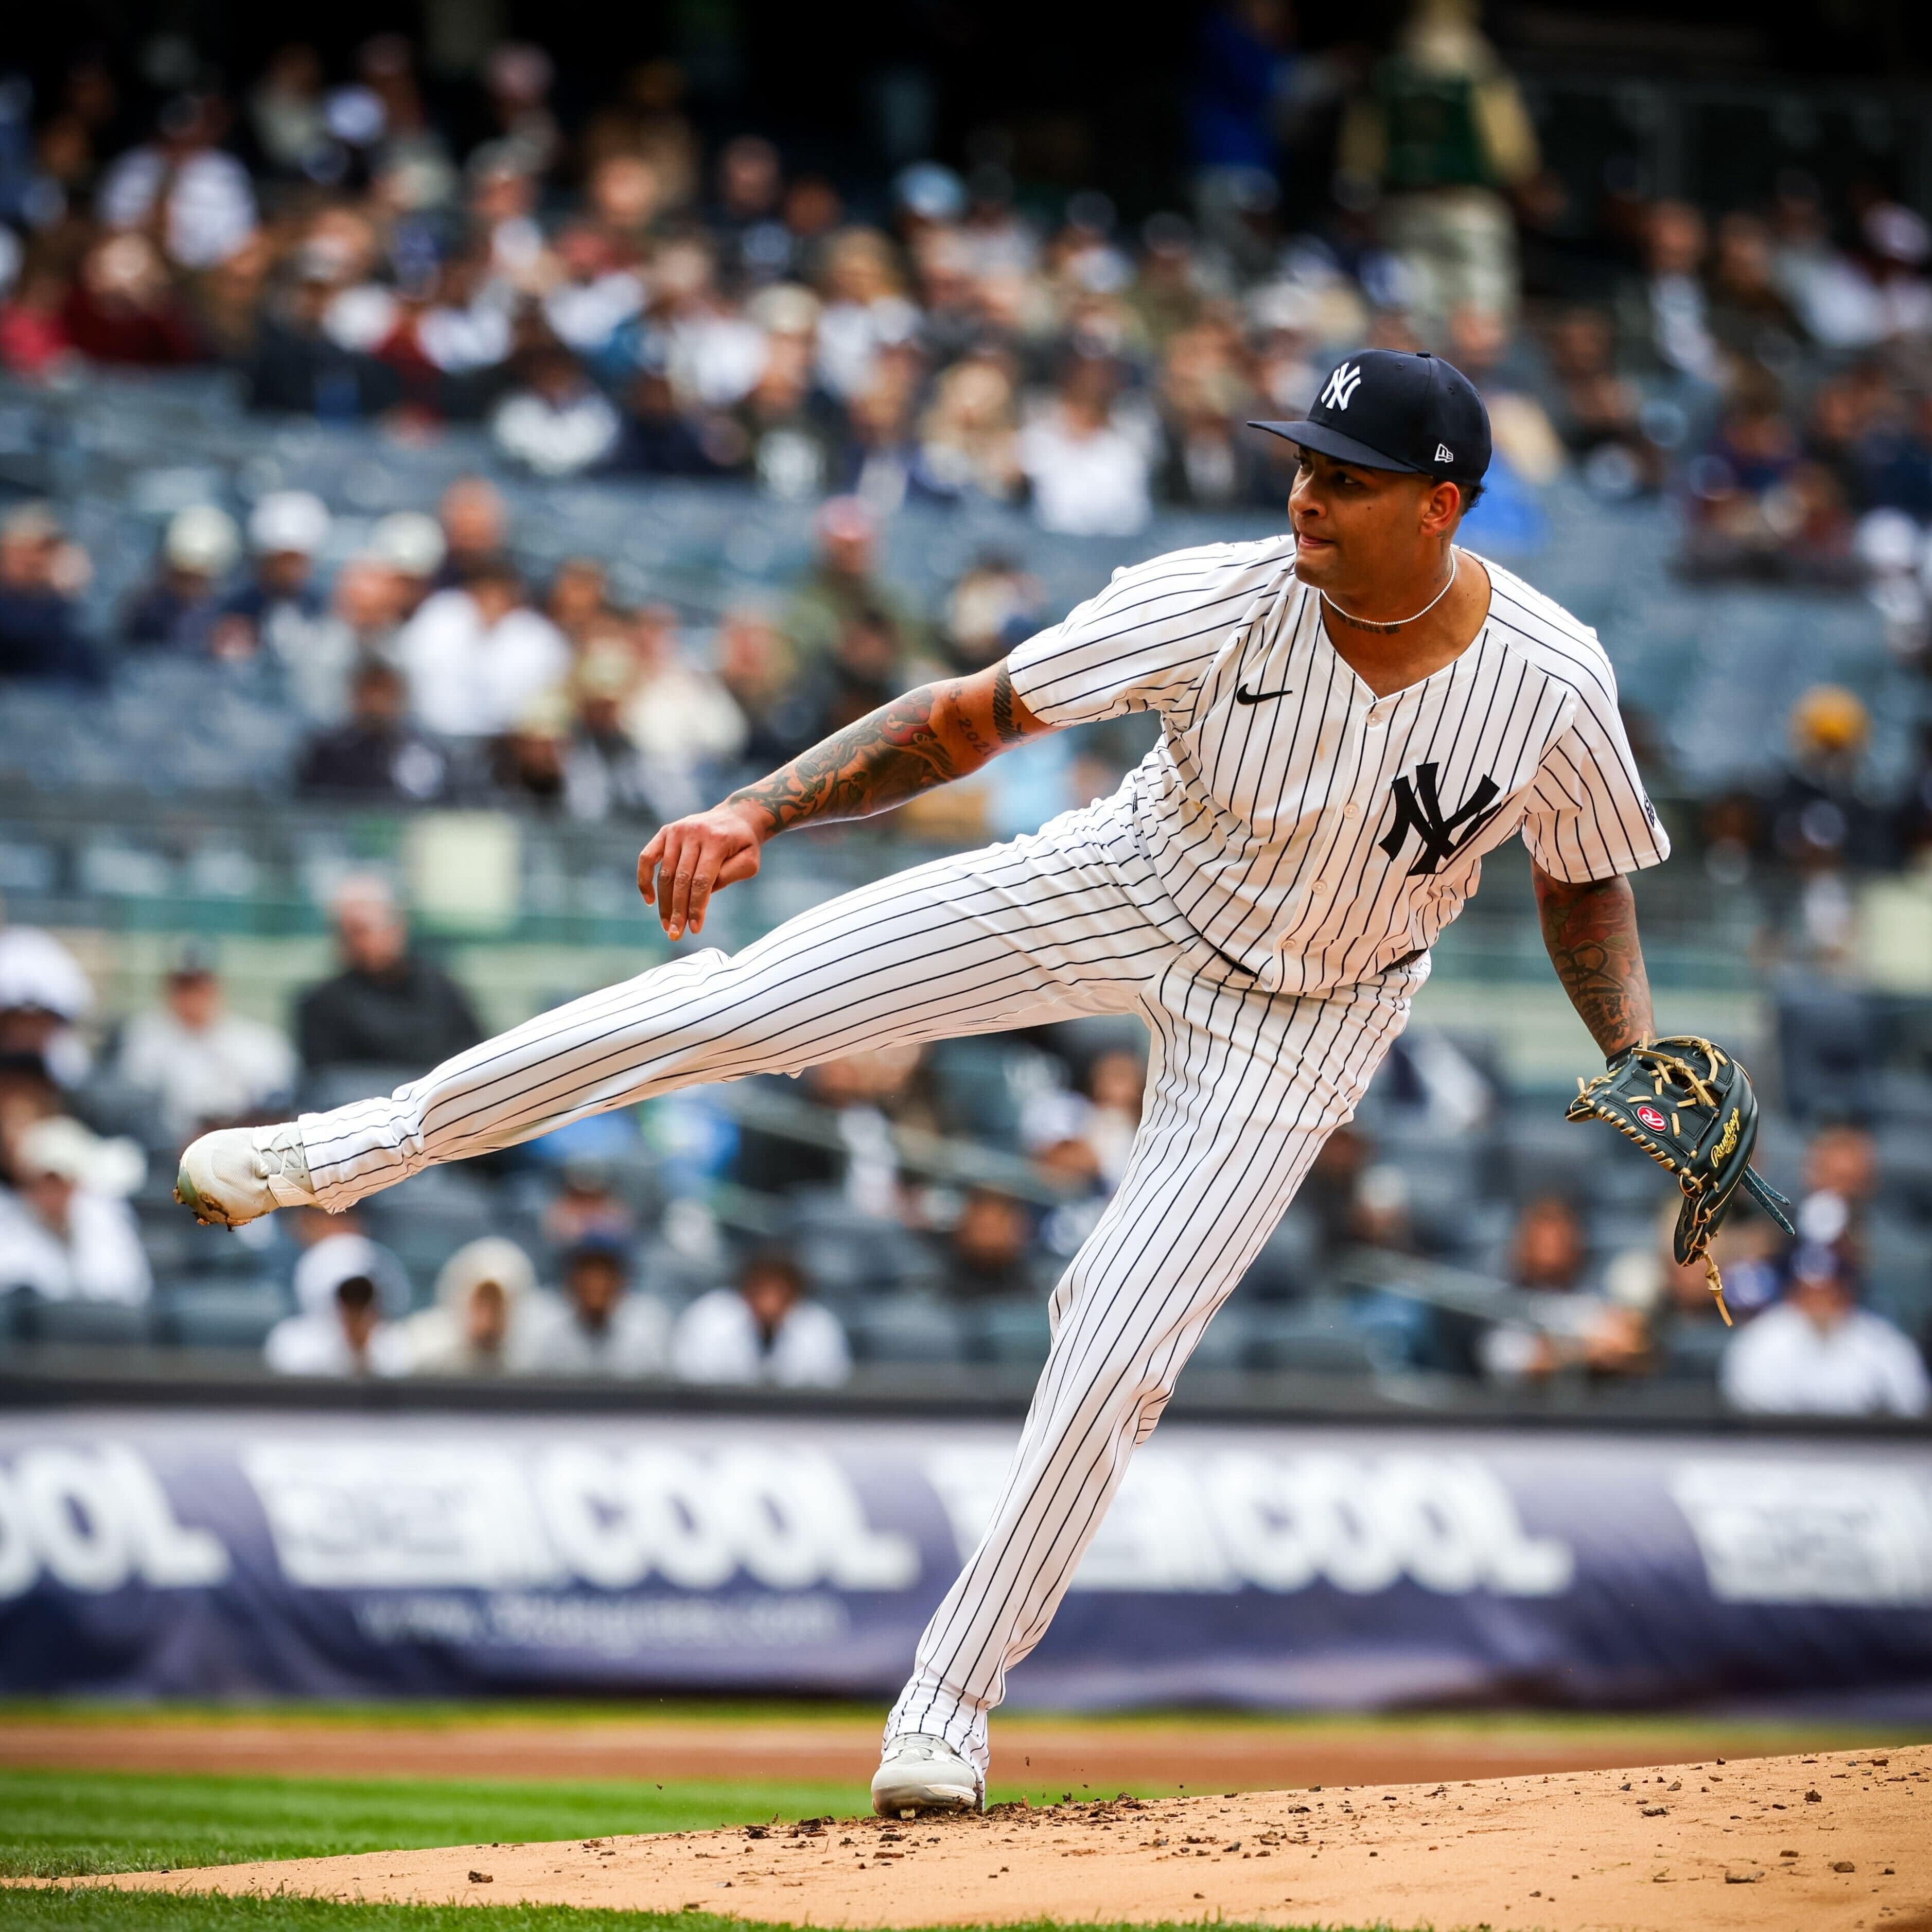 Yankees Manage To Hold Off Rays To Secure Series Win